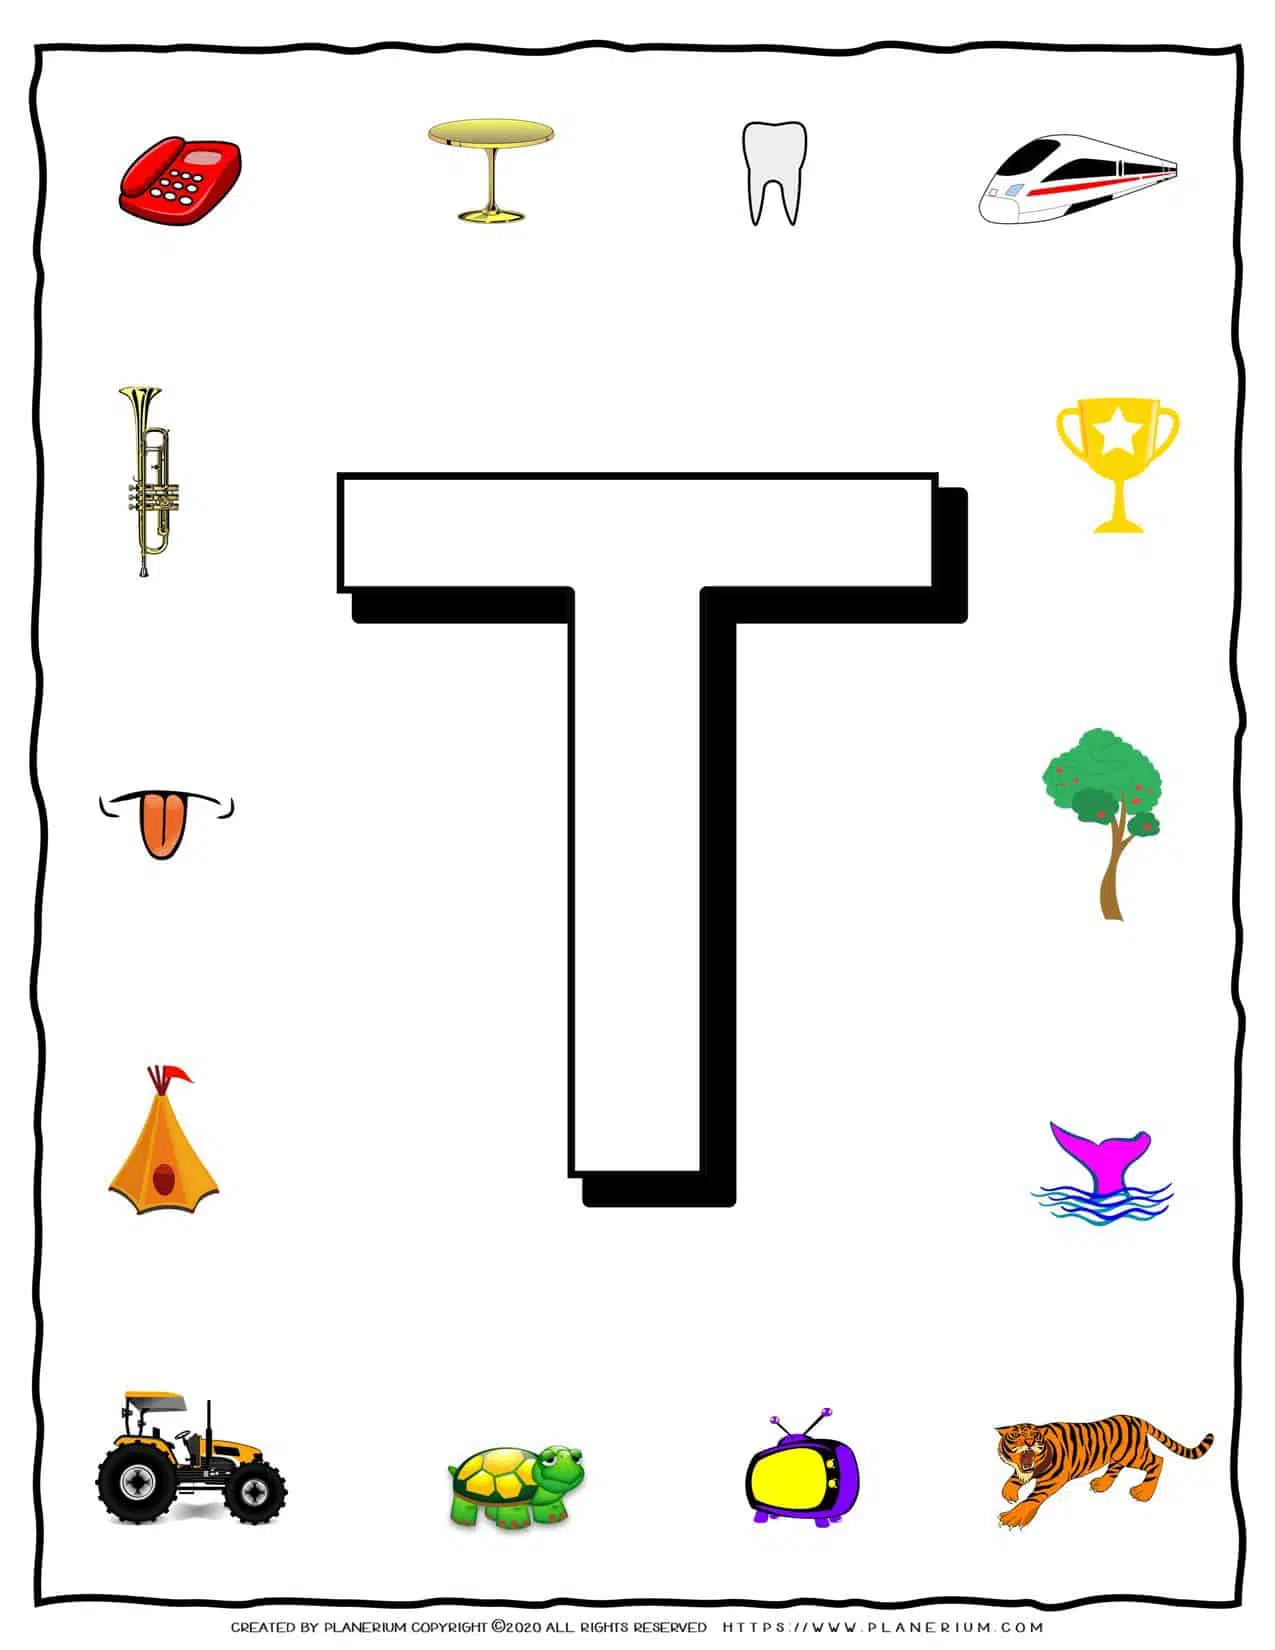 English Alphabet - Objects that starts with T | Planerium